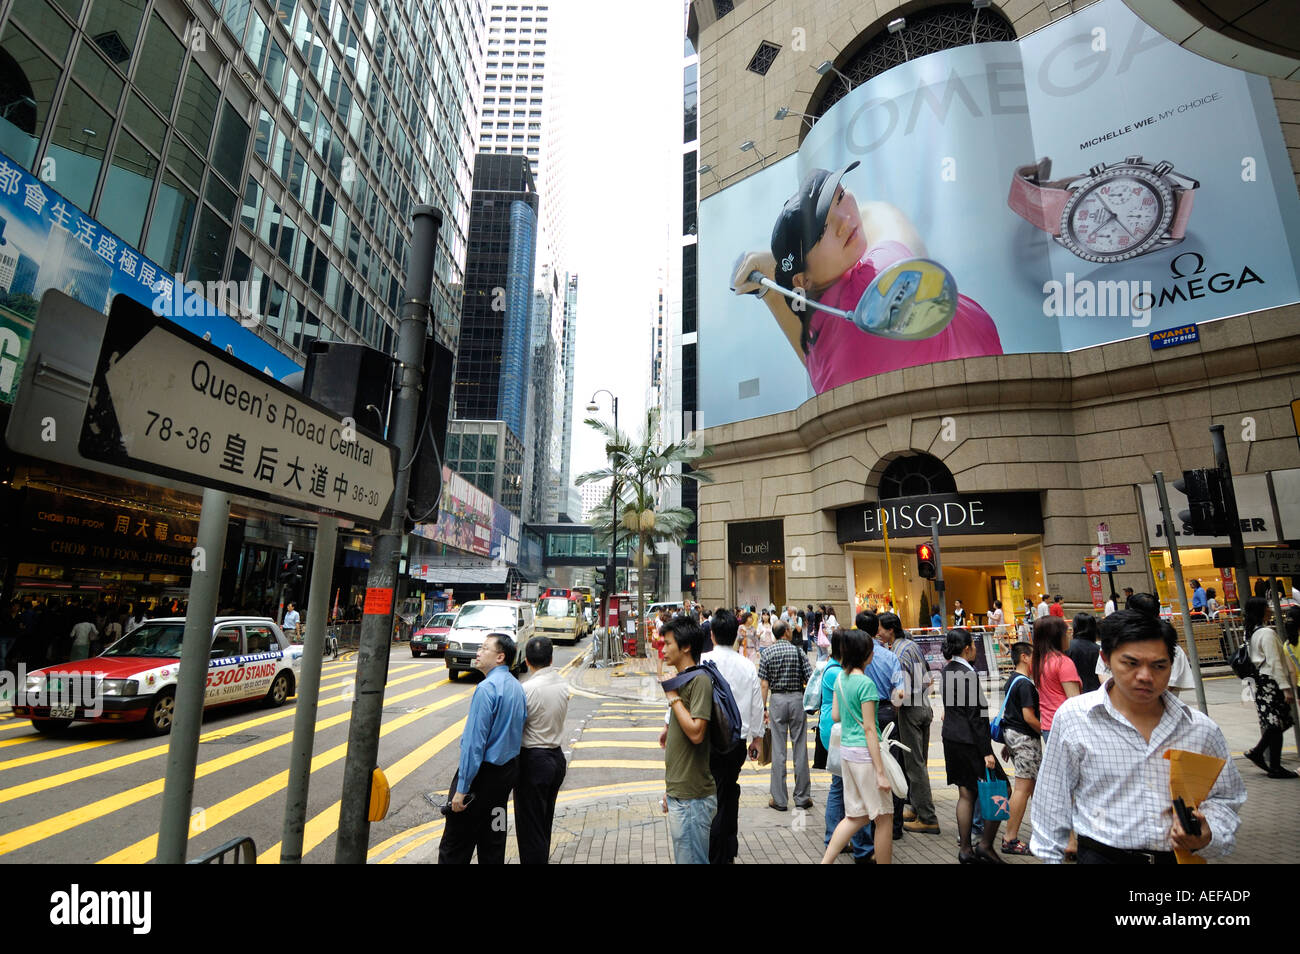 Michelle Wie American top golfer on a Omega watch billboard in the centre of Hong Kong Stock Photo